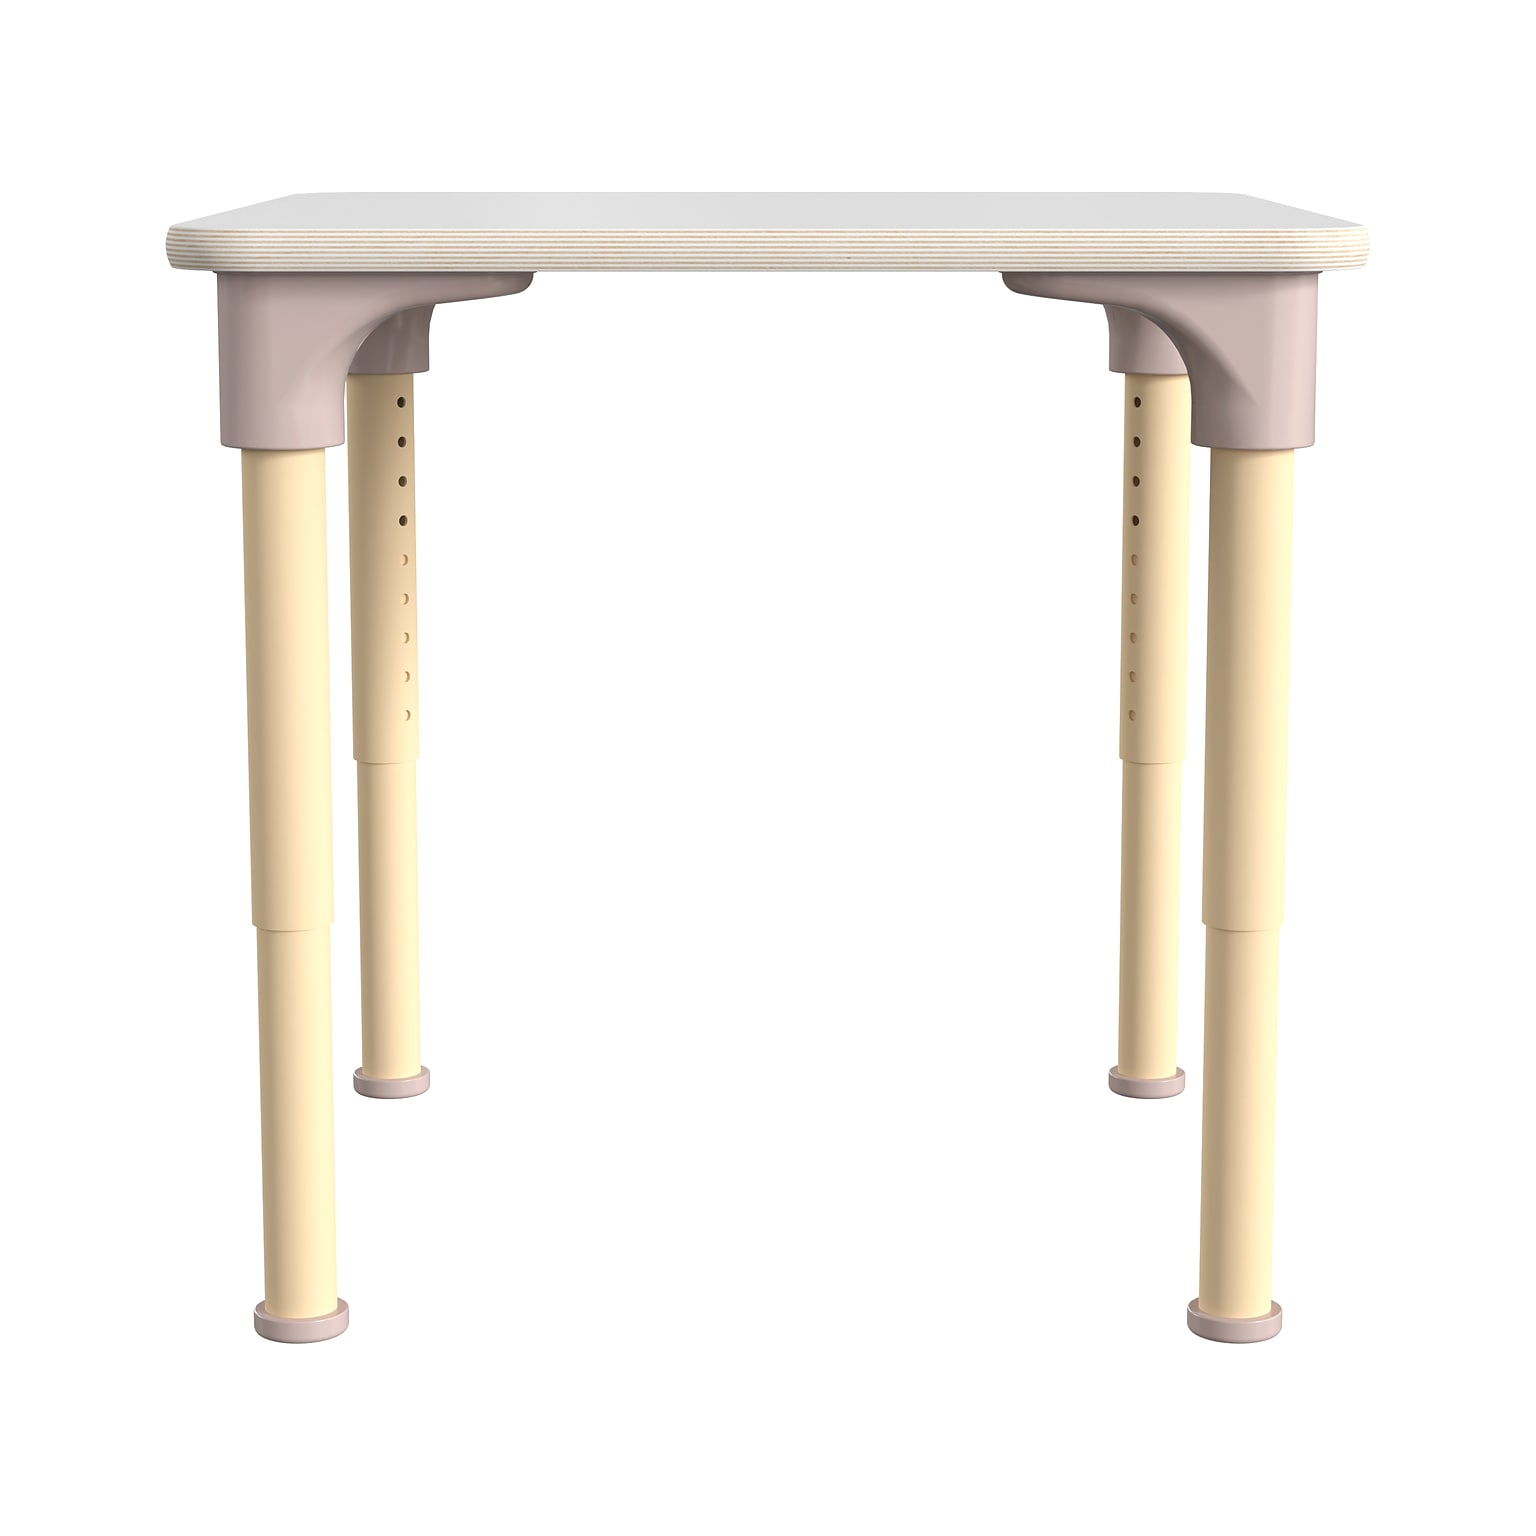 Flash Furniture Bright Beginnings Hercules Square Table, 24 x 24, Height Adjustable, White/Beech (MK-ME088024-GG)